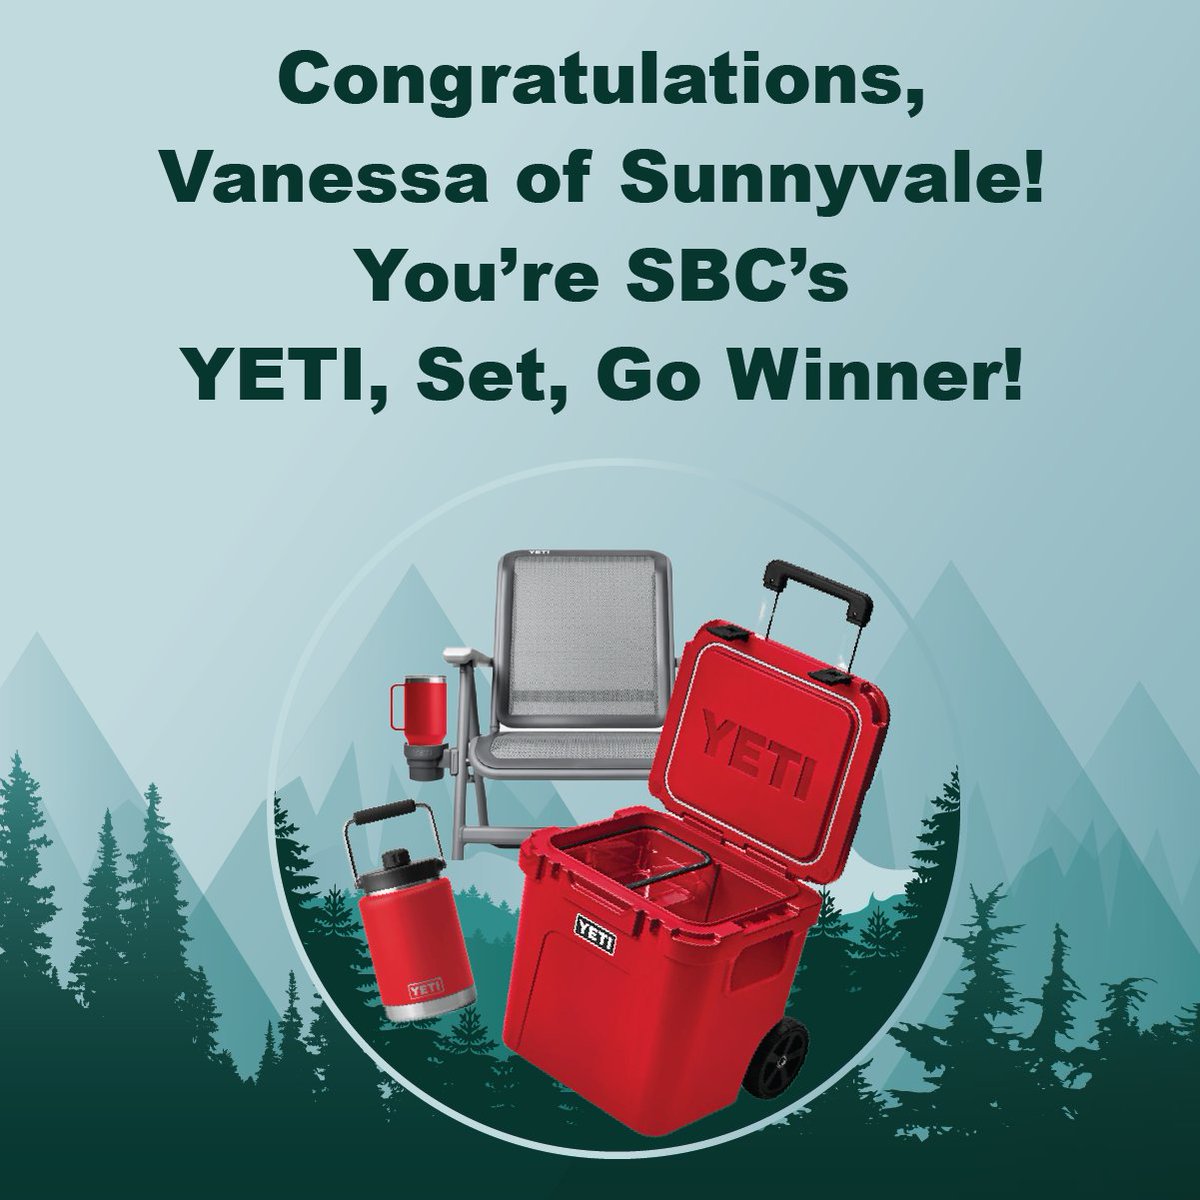 A big congratulations to Vanessa of Sunnyvale, the winner of our April campaign! ❤️